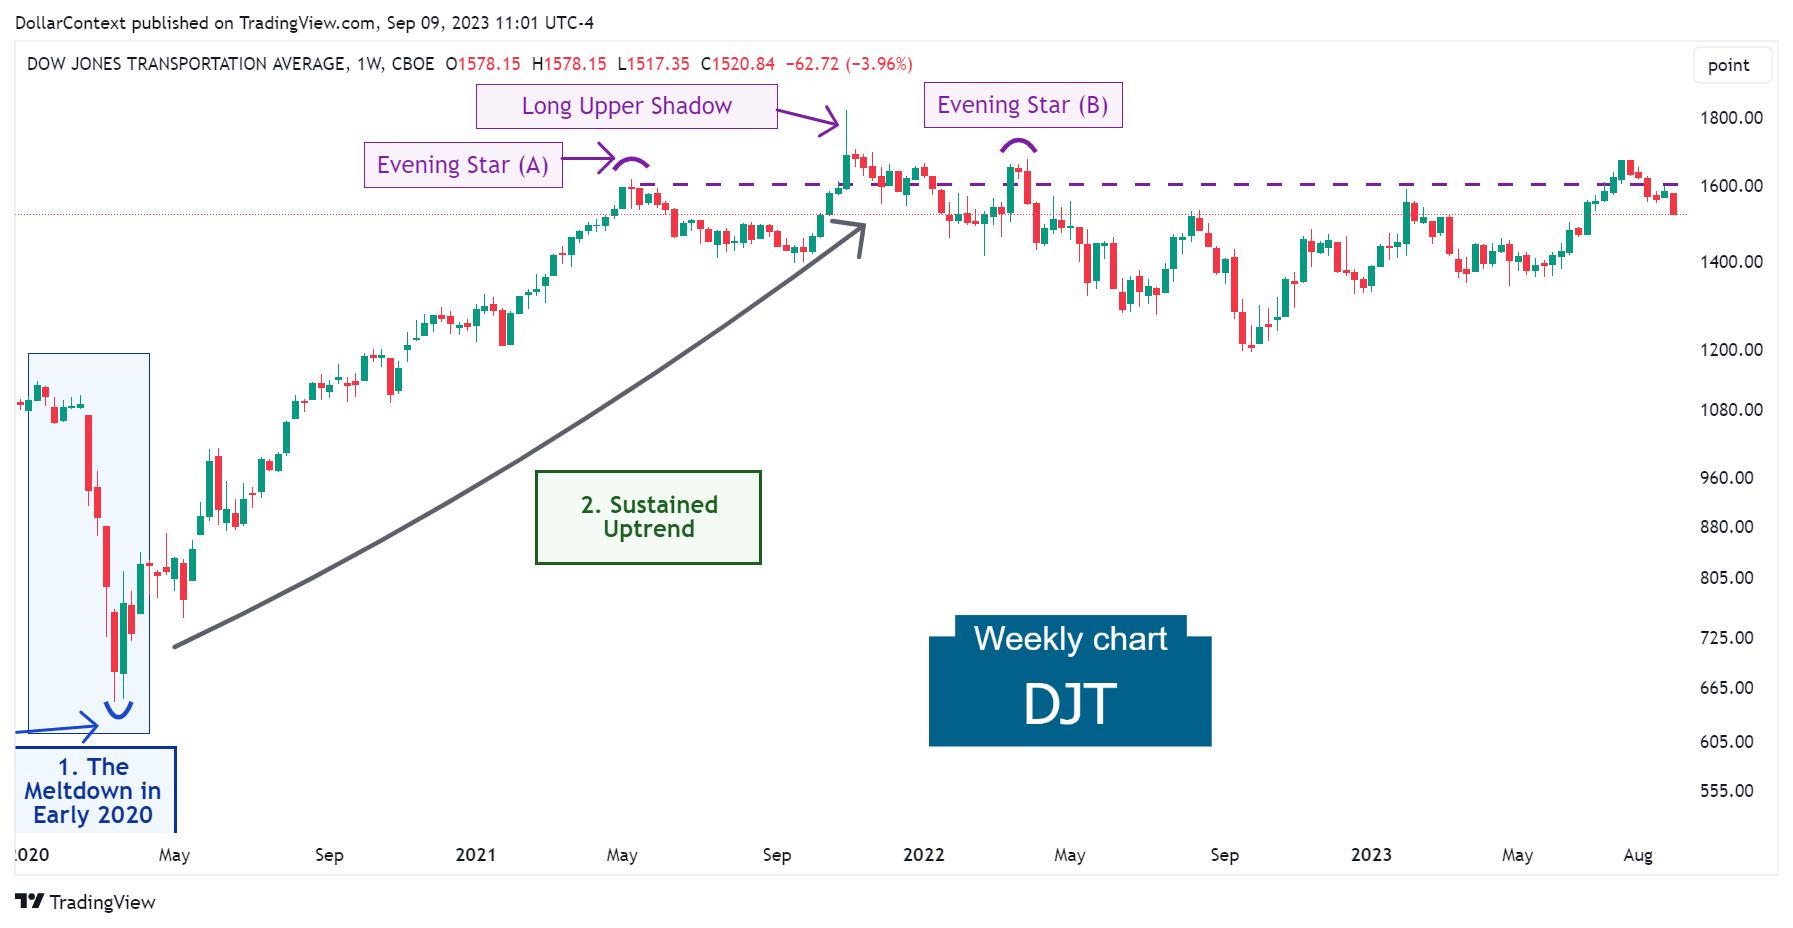 DJT: Uptrend in 2021 and Top in 2022 (Weekly Chart)